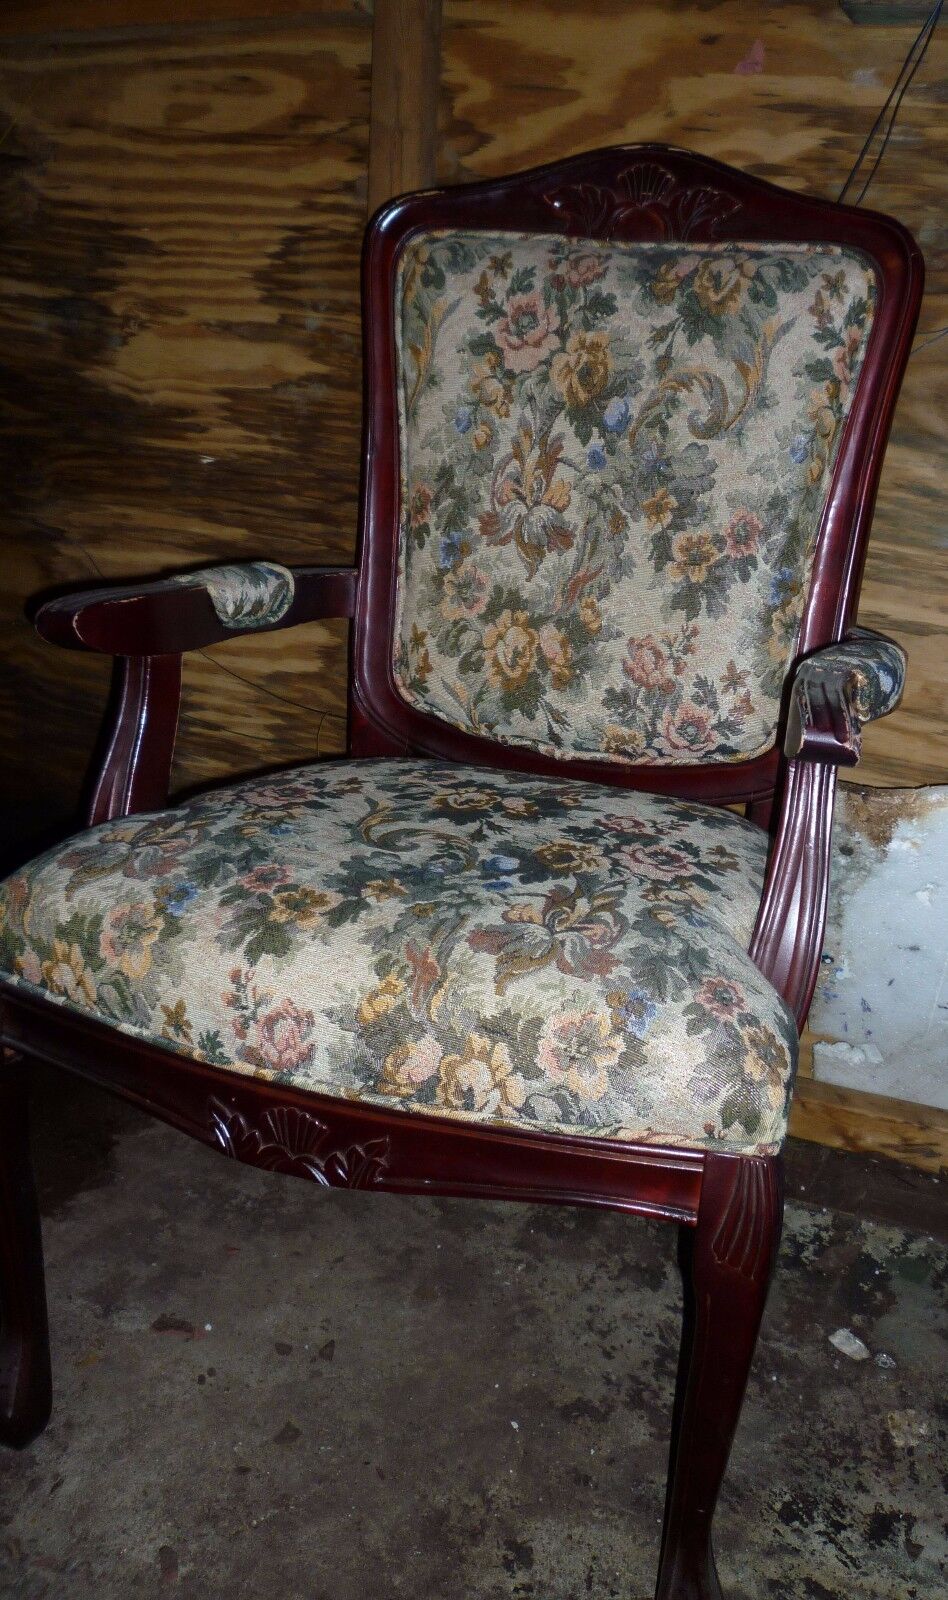 EXCELLENT CONDITION UPHOLSTERED WOODEN CHAIRS